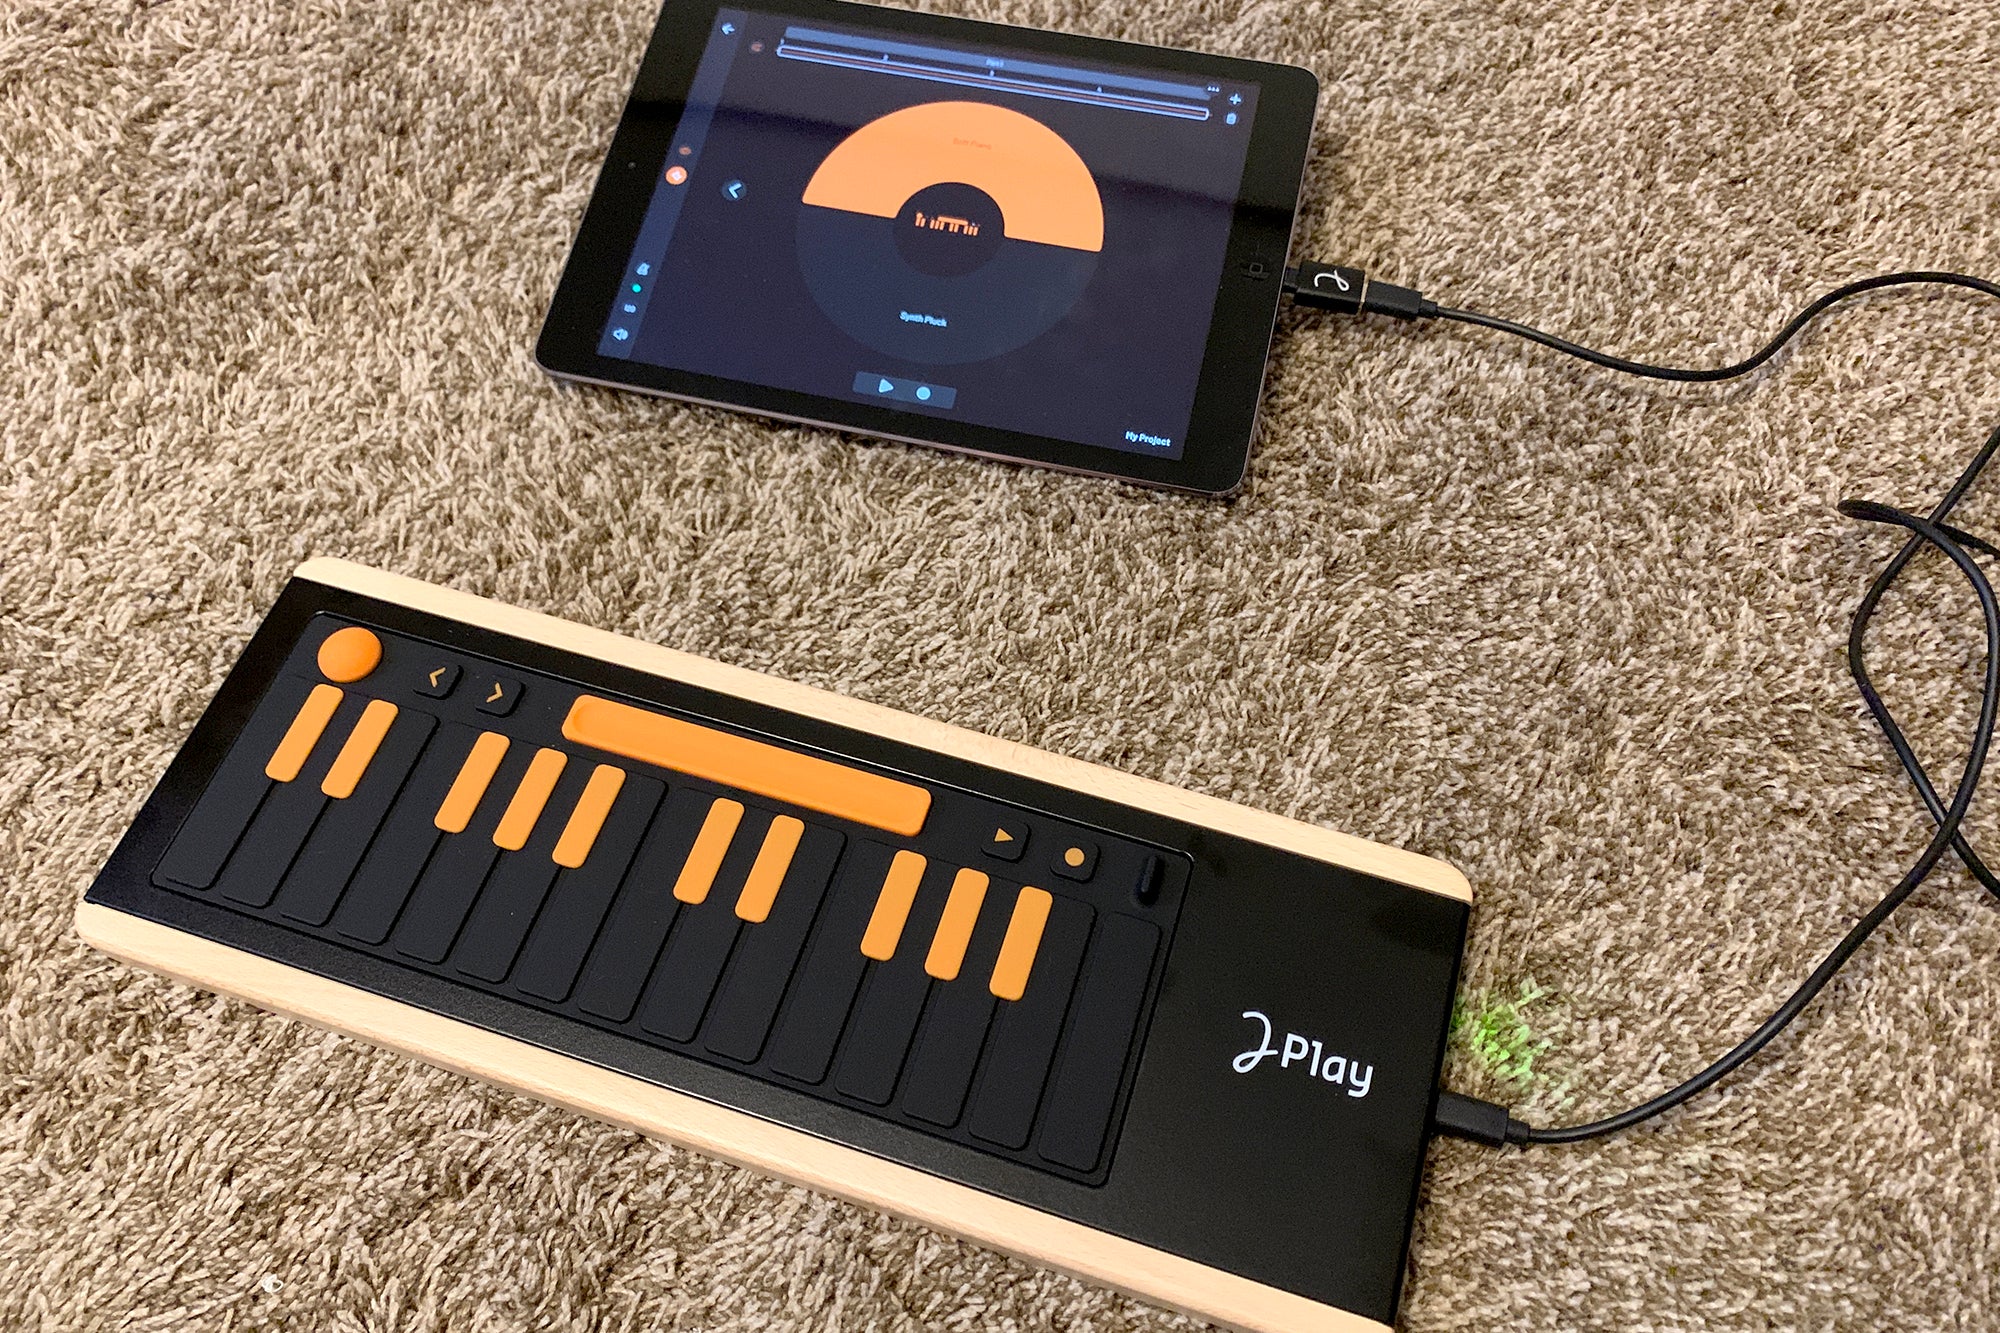 The Joue Play MIDI controller on a carpet with an iPad and Scaler module